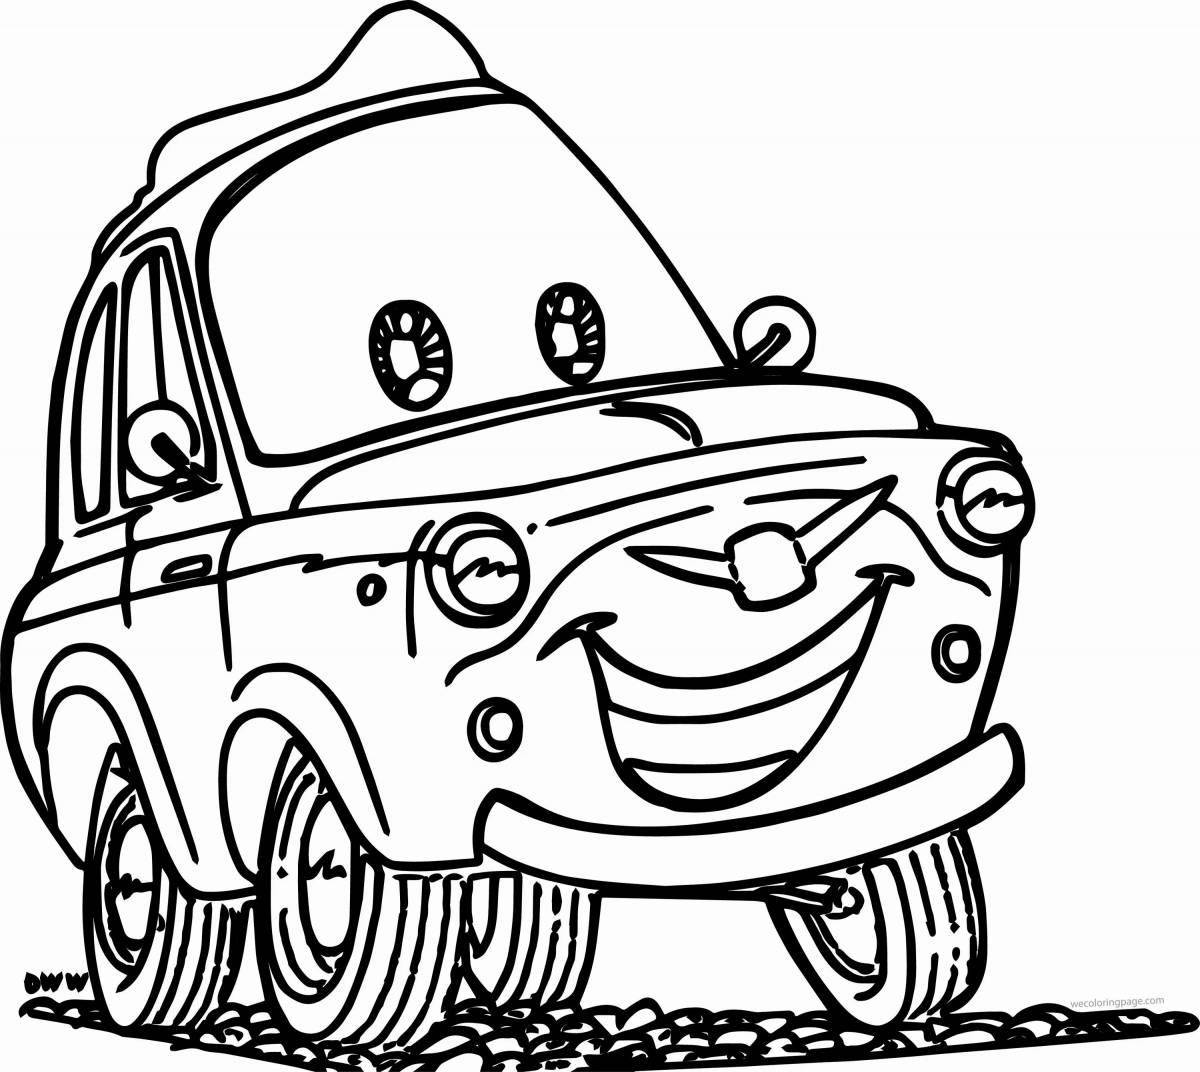 Coloring page dazzling car with eyes